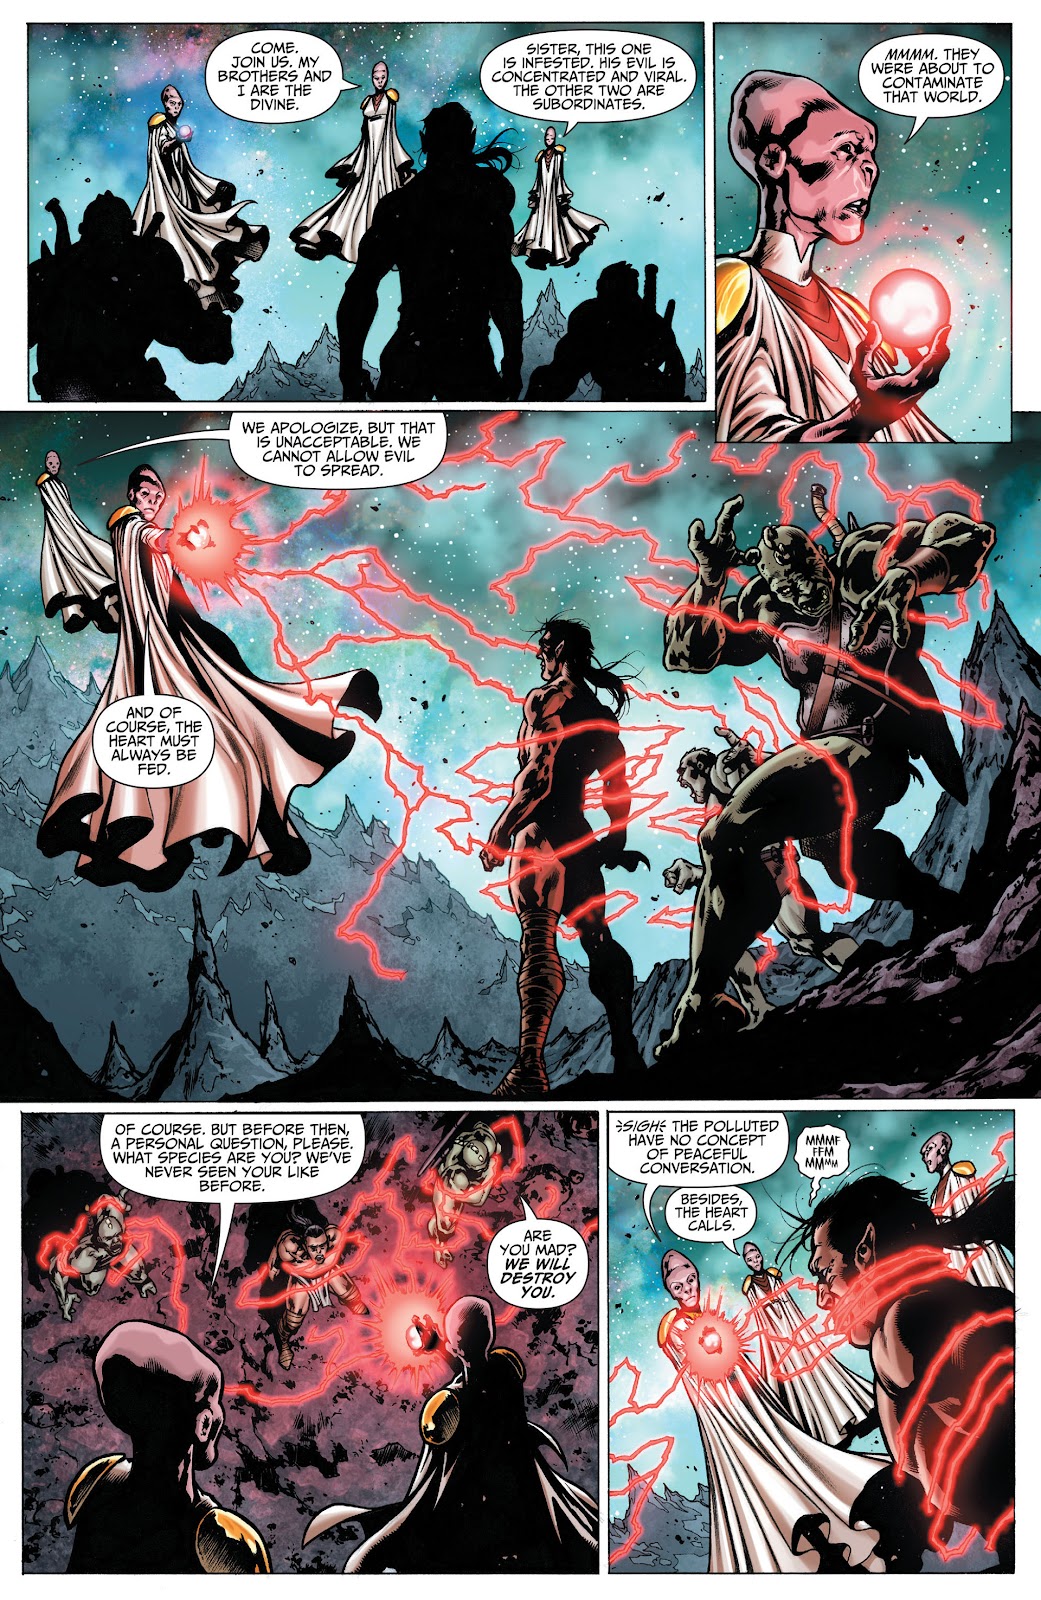 Teen Titans (2011) issue 23.1 - Page 4